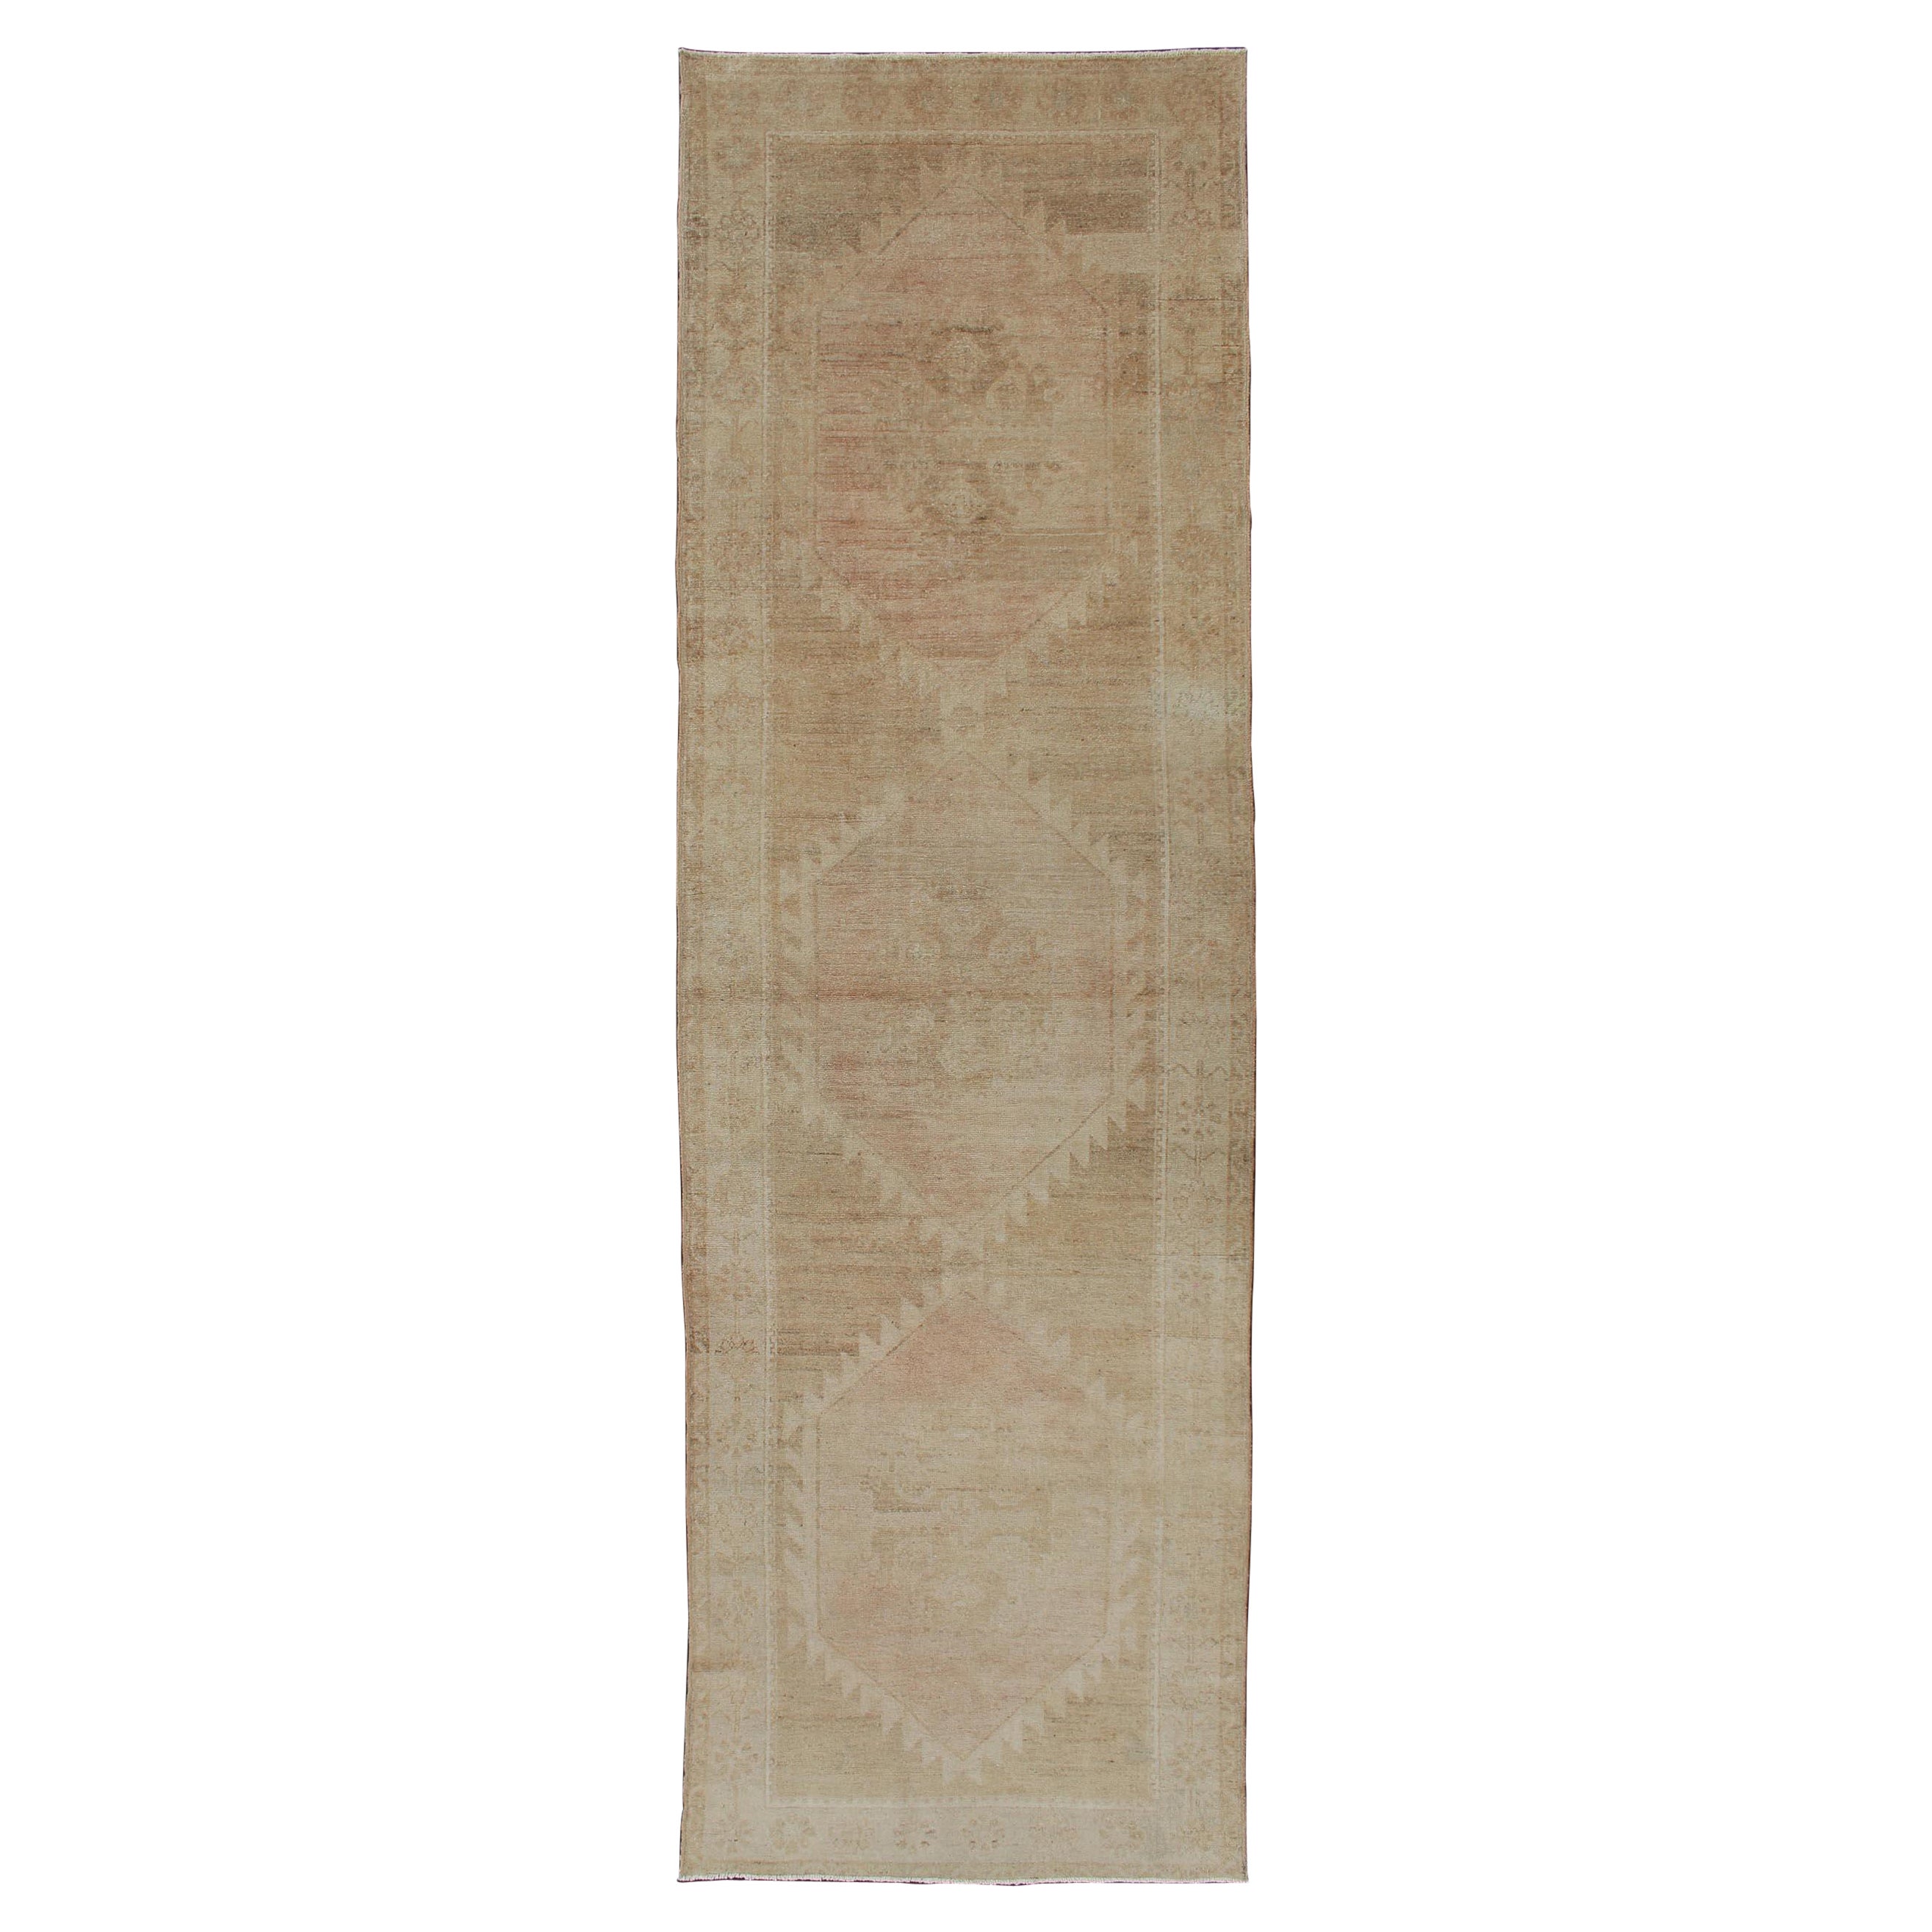 Vintage Turkish Oushak Runner Neutral Colors with Tribal Design in Earth Colors